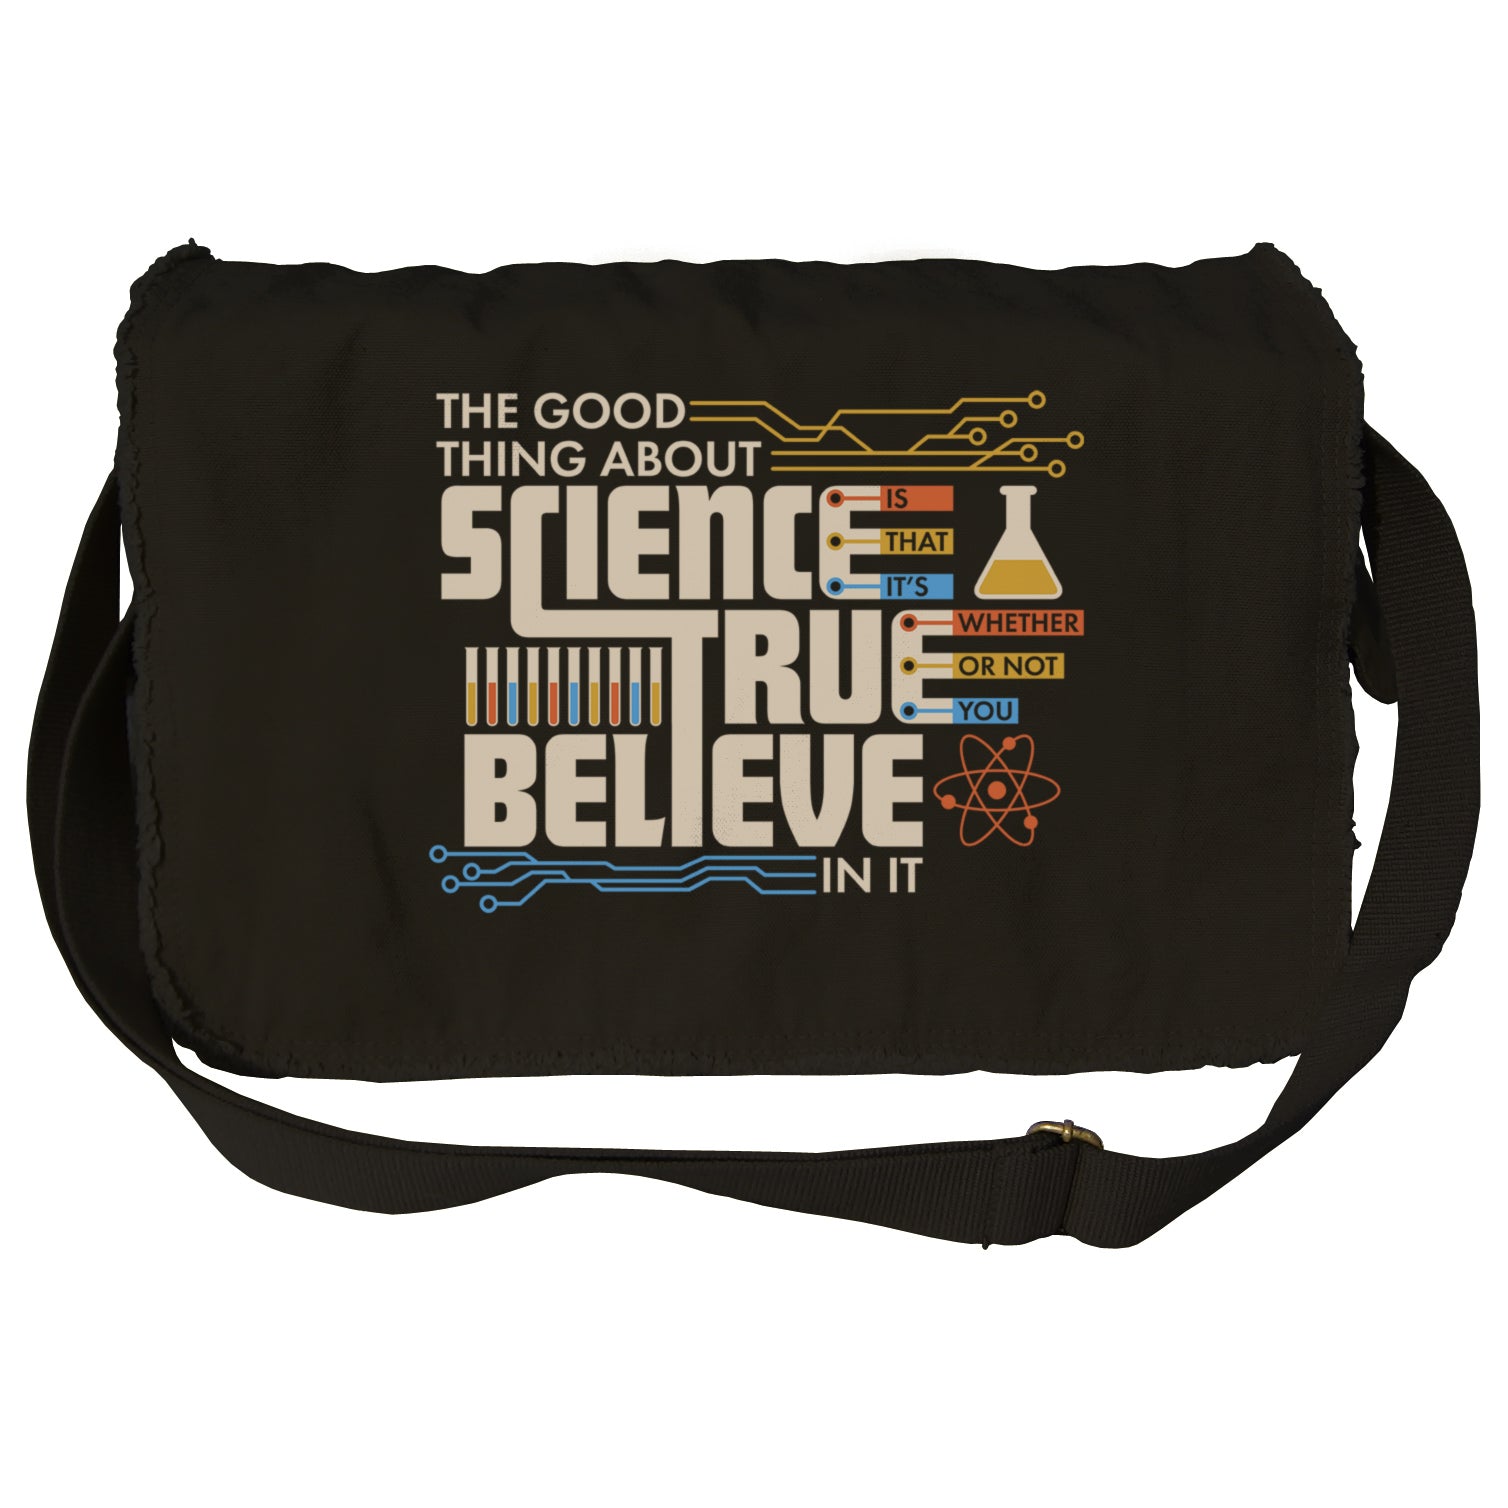 The Good Thing About Science Is That It's True Messenger Bag